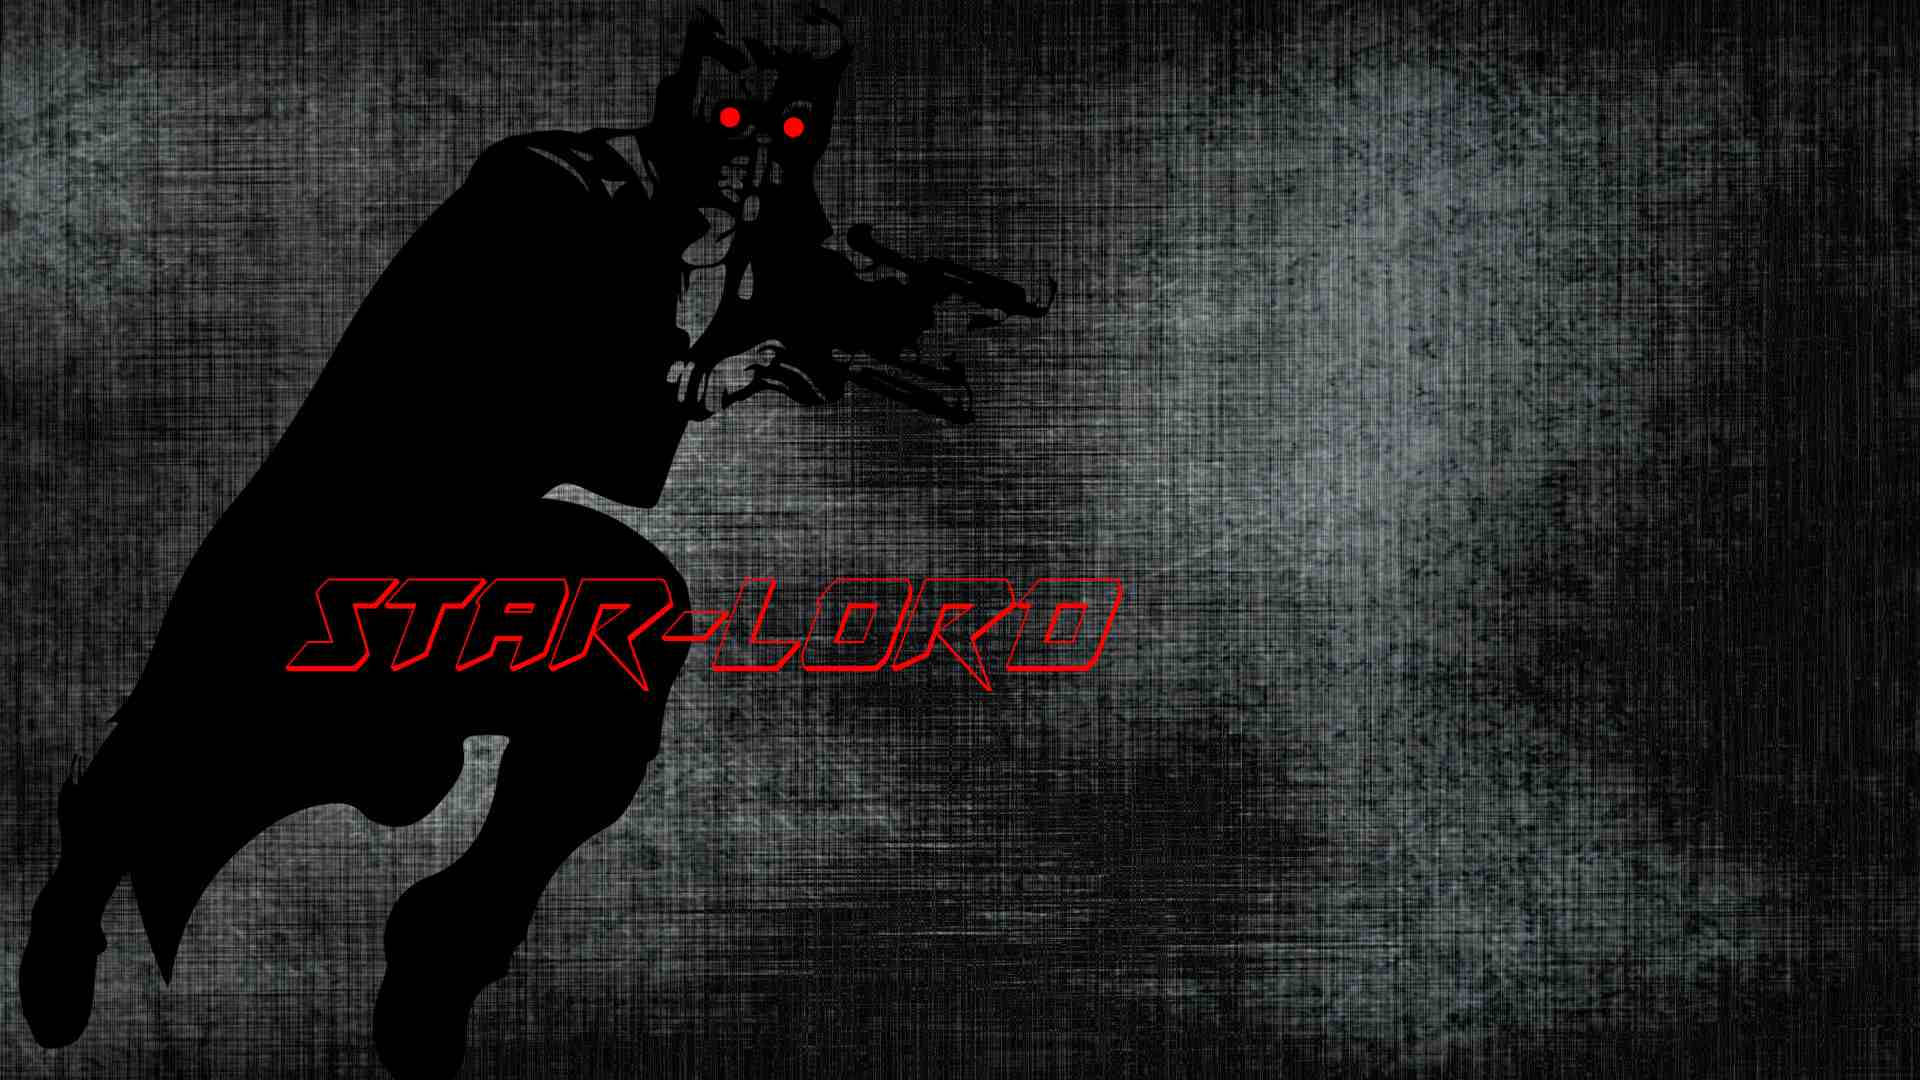 Star Lord Darkness Background